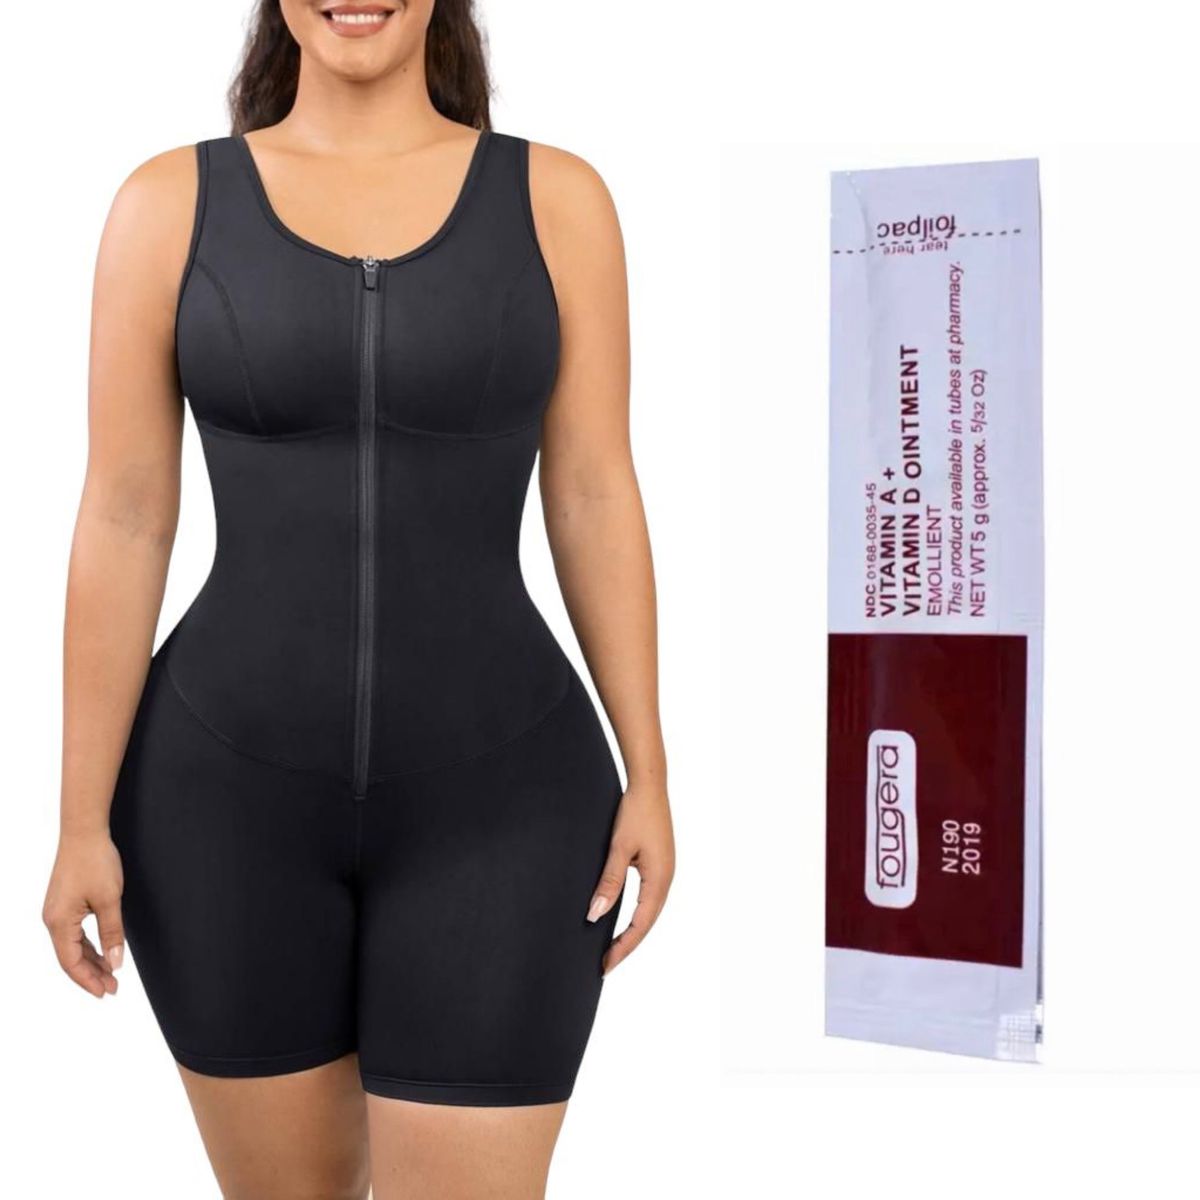 BUNDLE-High Quality Resistance ZIPPER Fitness Compression Tummy Shaper, Shop Today. Get it Tomorrow!